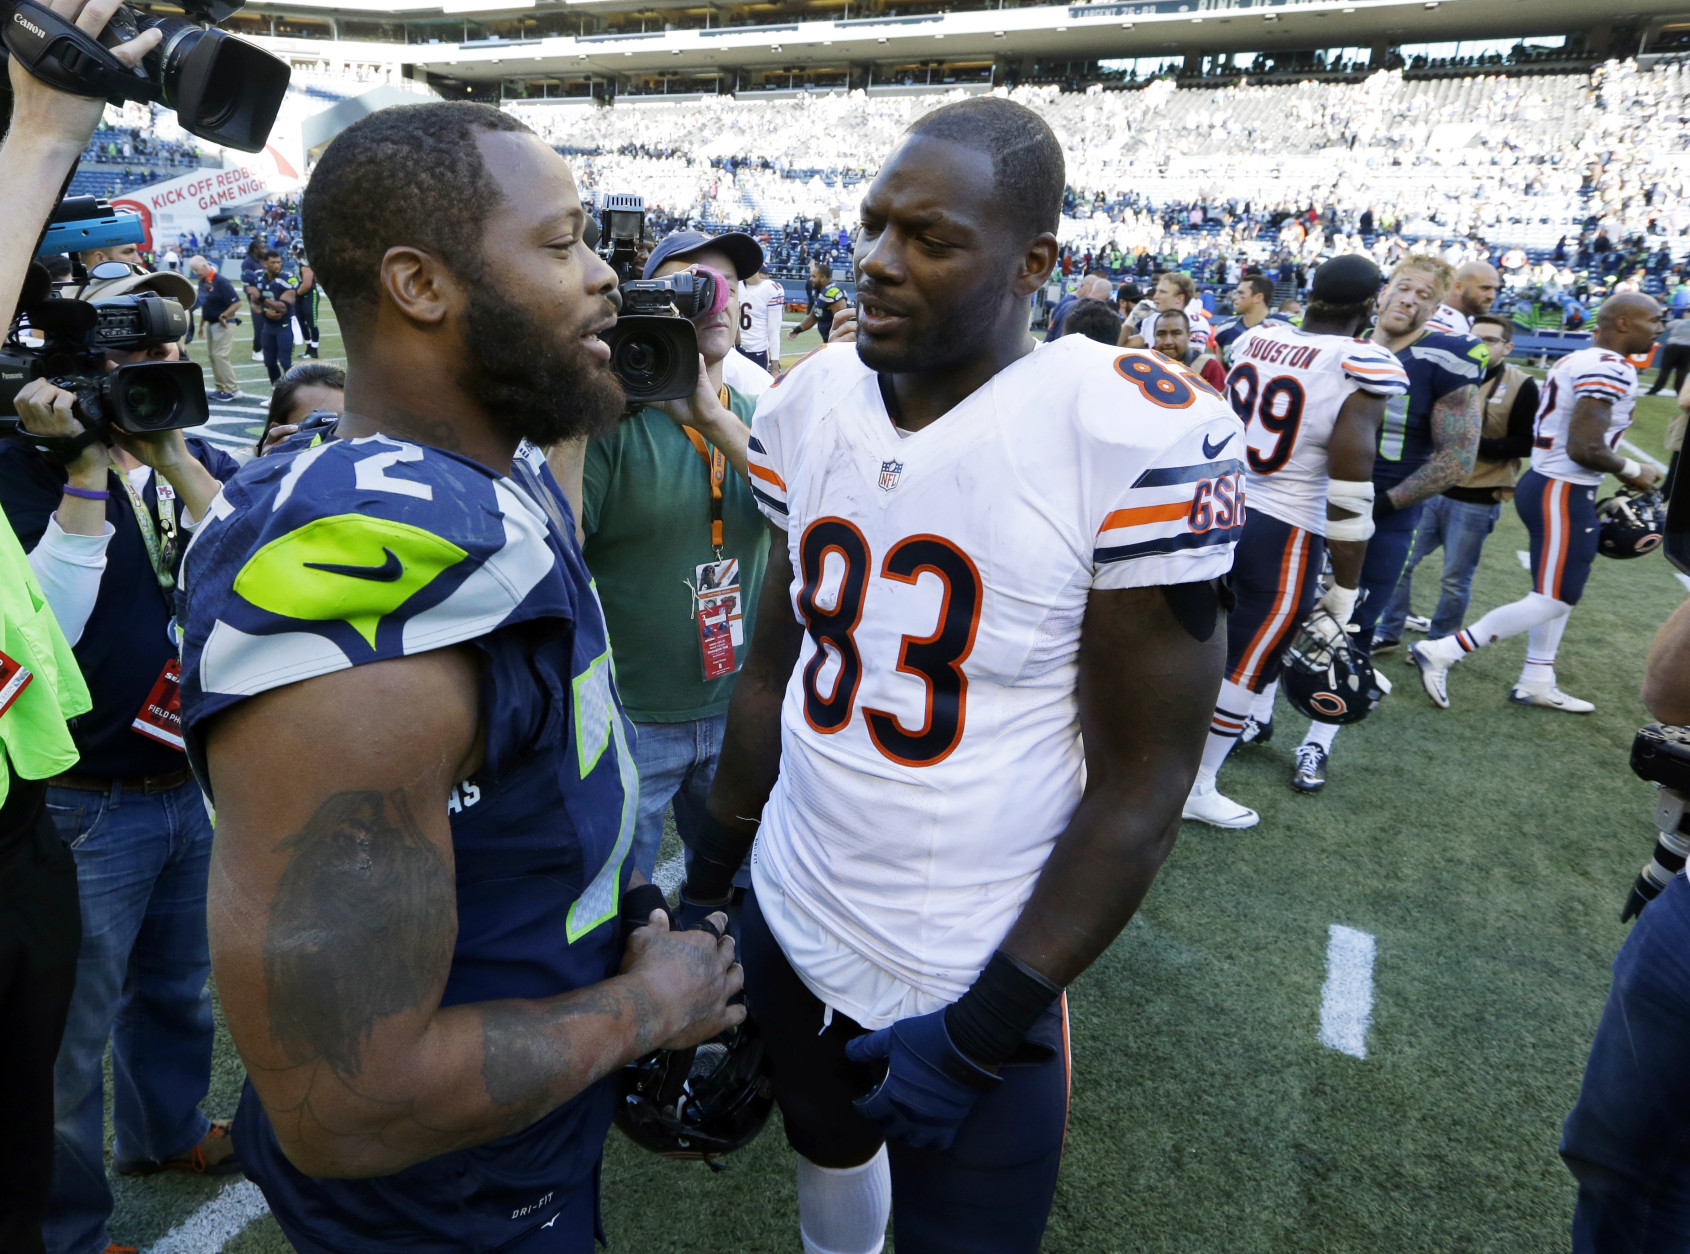 Seattle Seahawks defensive end Michael Bennett, left, talks with his brother, Chicago Bears tight end Martellus Bennett, right, after an NFL football game, Sunday, Sept. 27, 2015, in Seattle. The Seahawks beat the Bears 26-0. (AP Photo/Elaine Thompson)